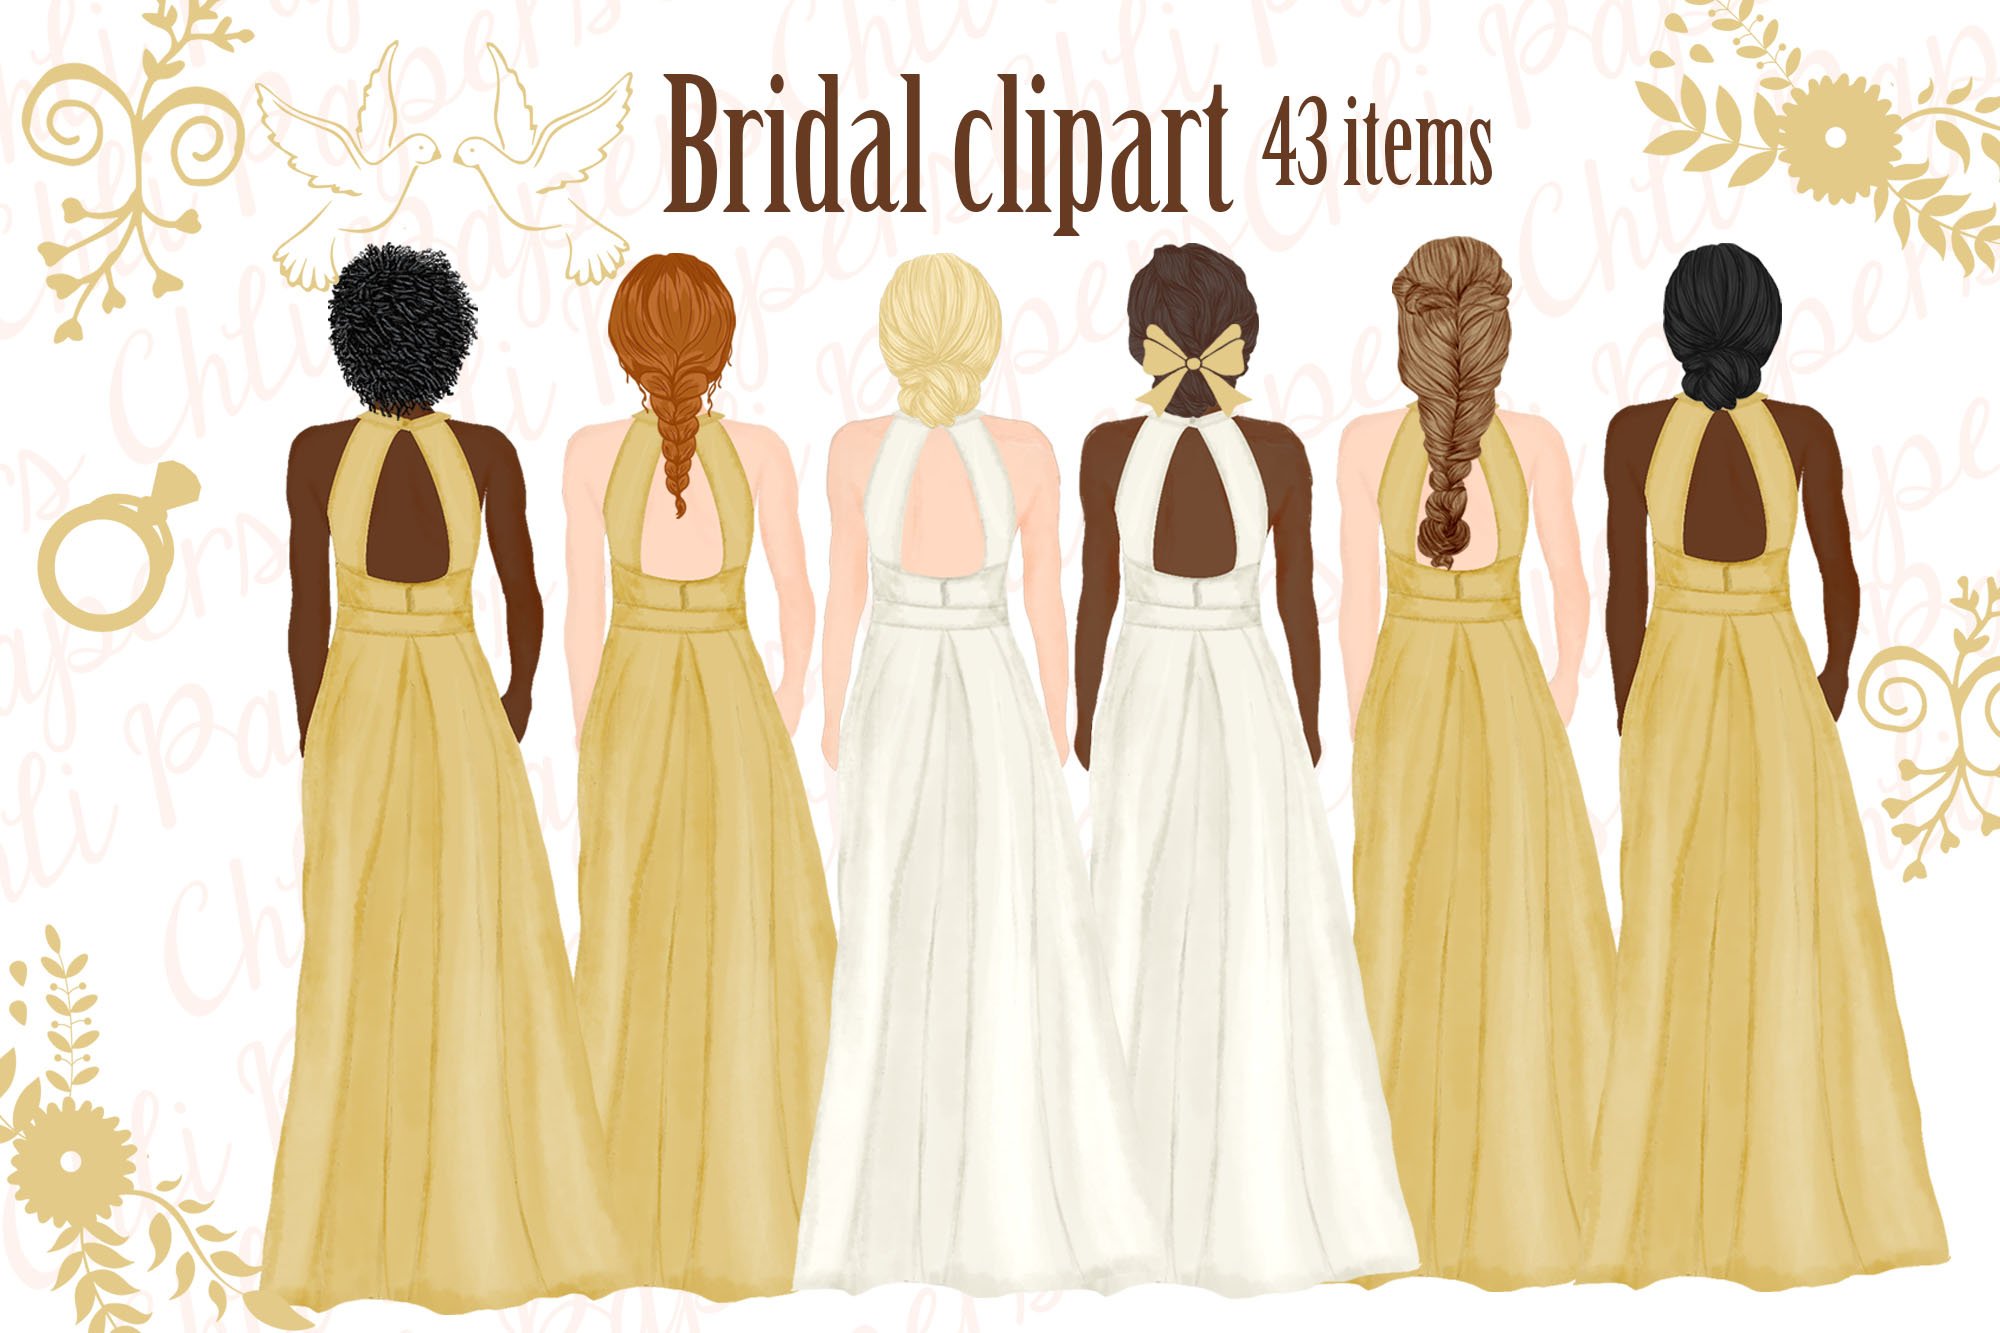 Bride and Bridesmaids clipart cover image.